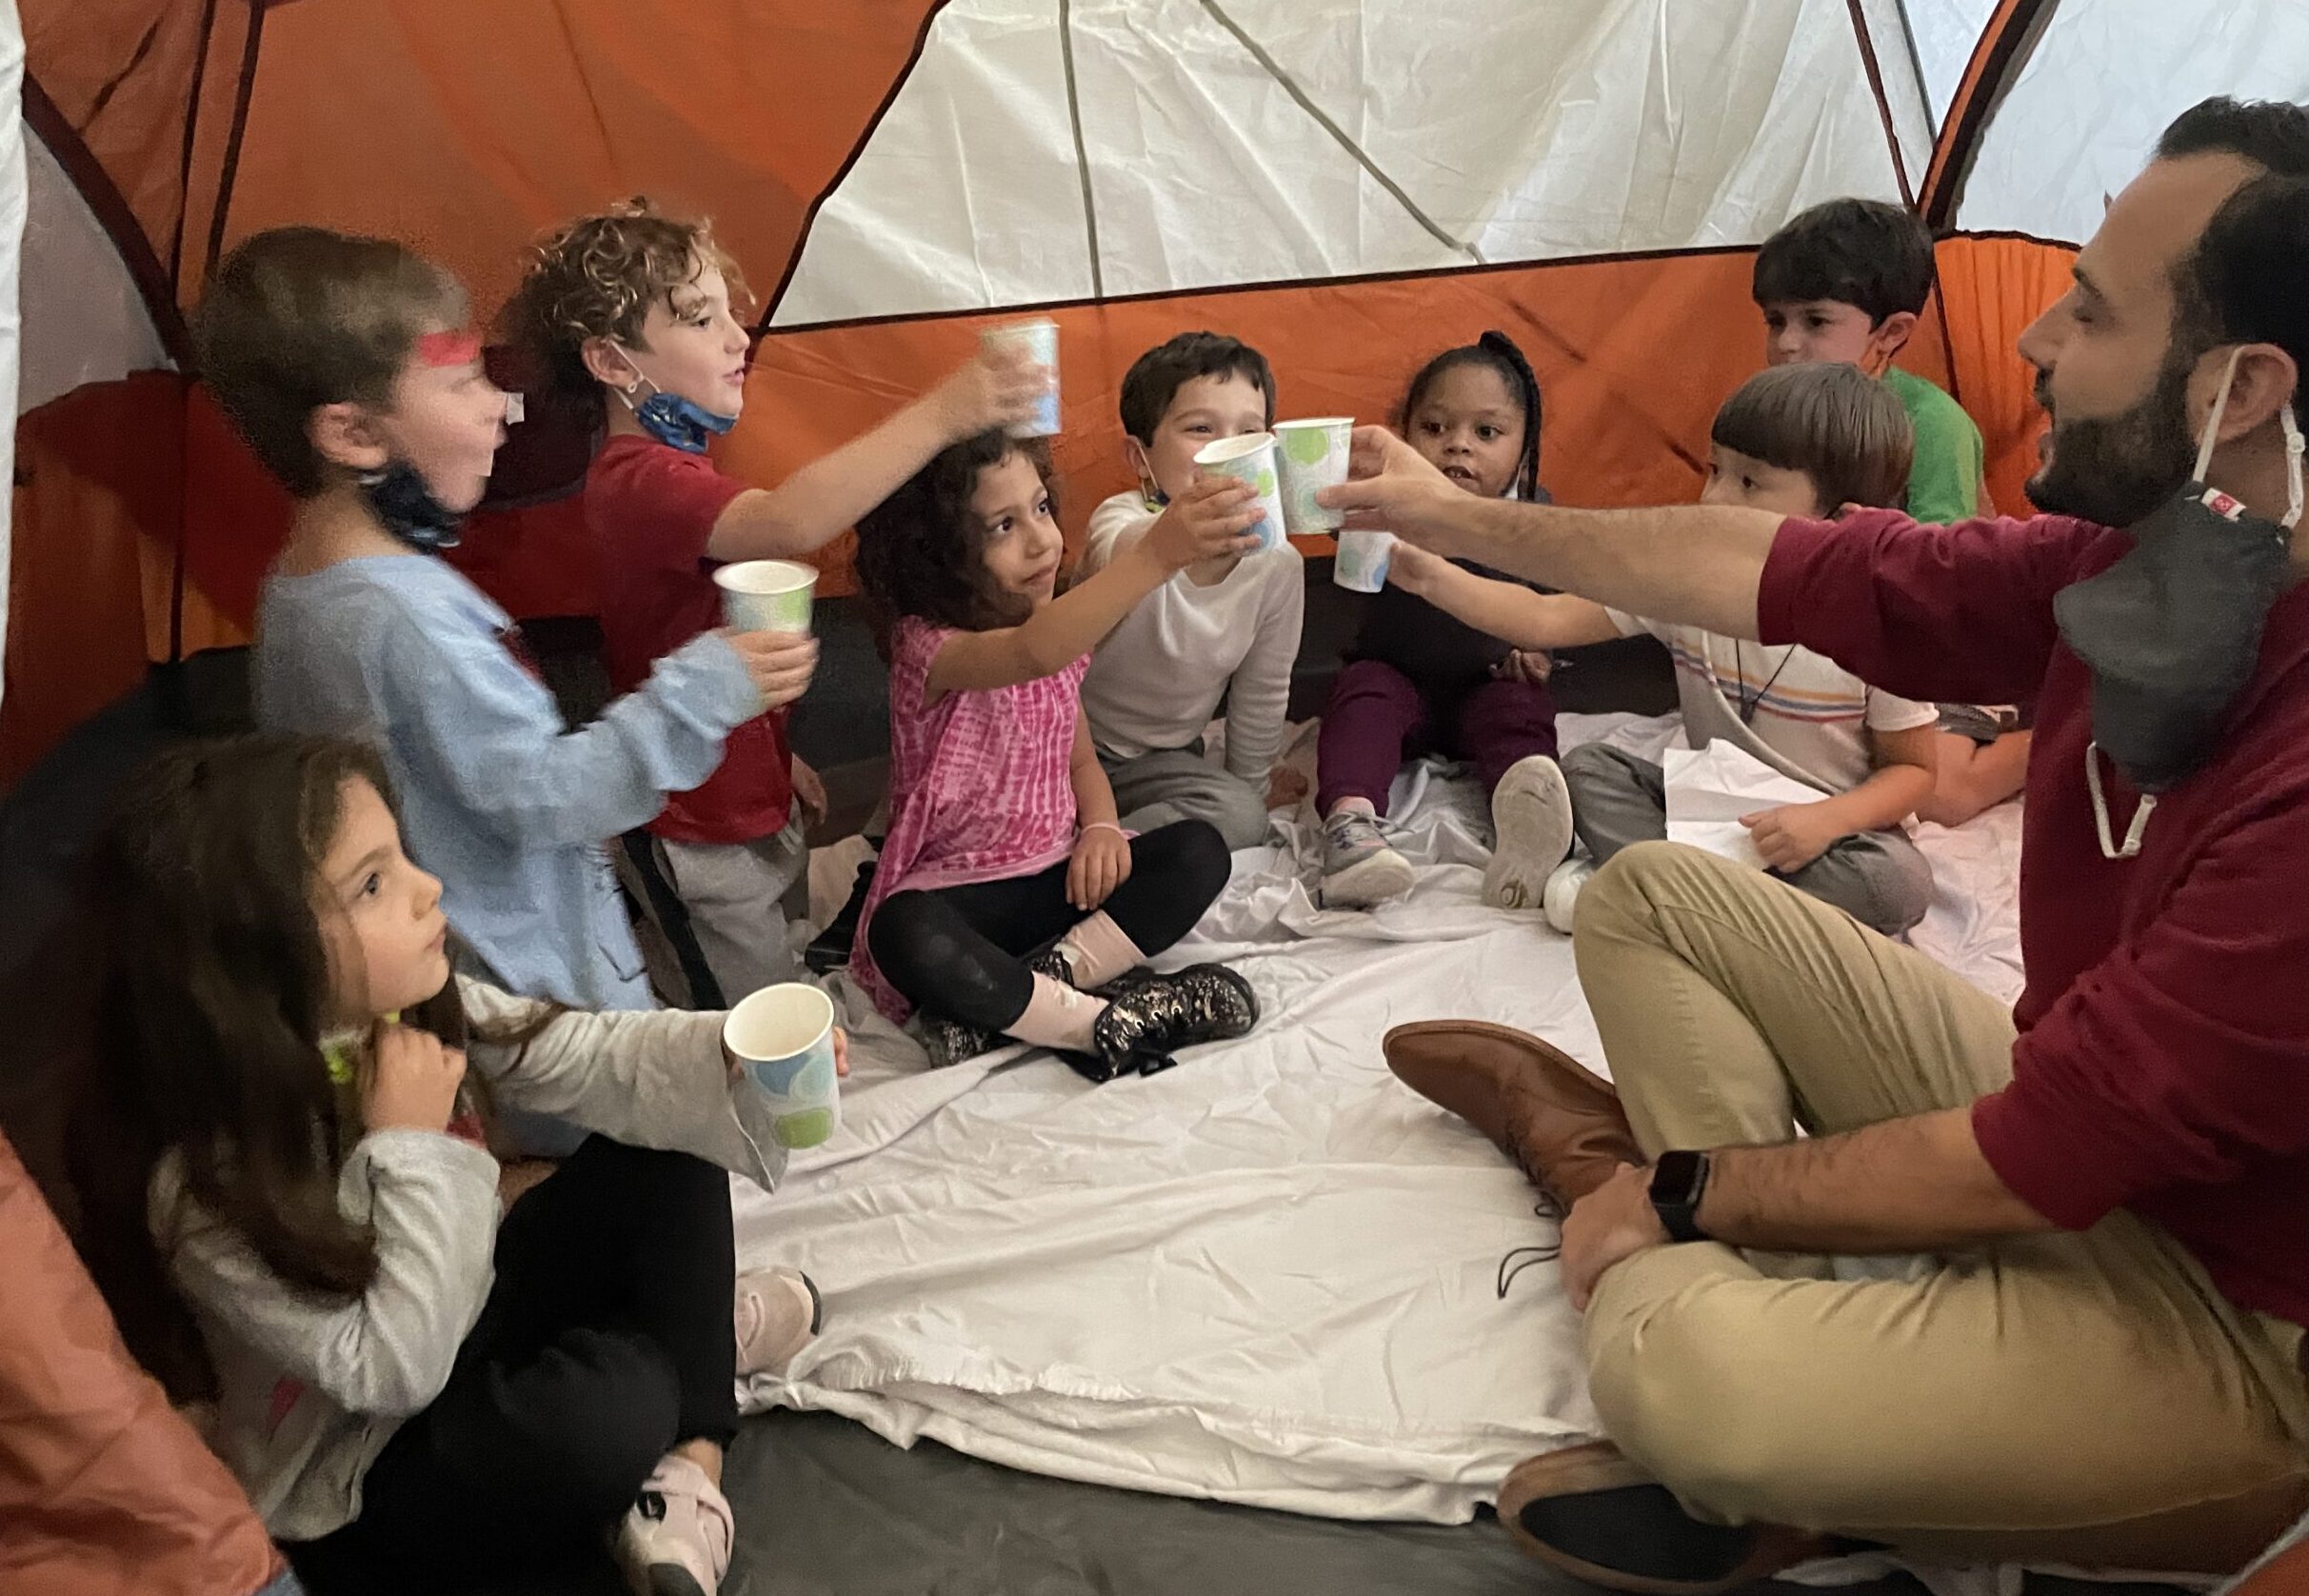 Rabbi Alex welcomes our Pre-K class to his tent as they learn about hachnasat orchim (hospitality)